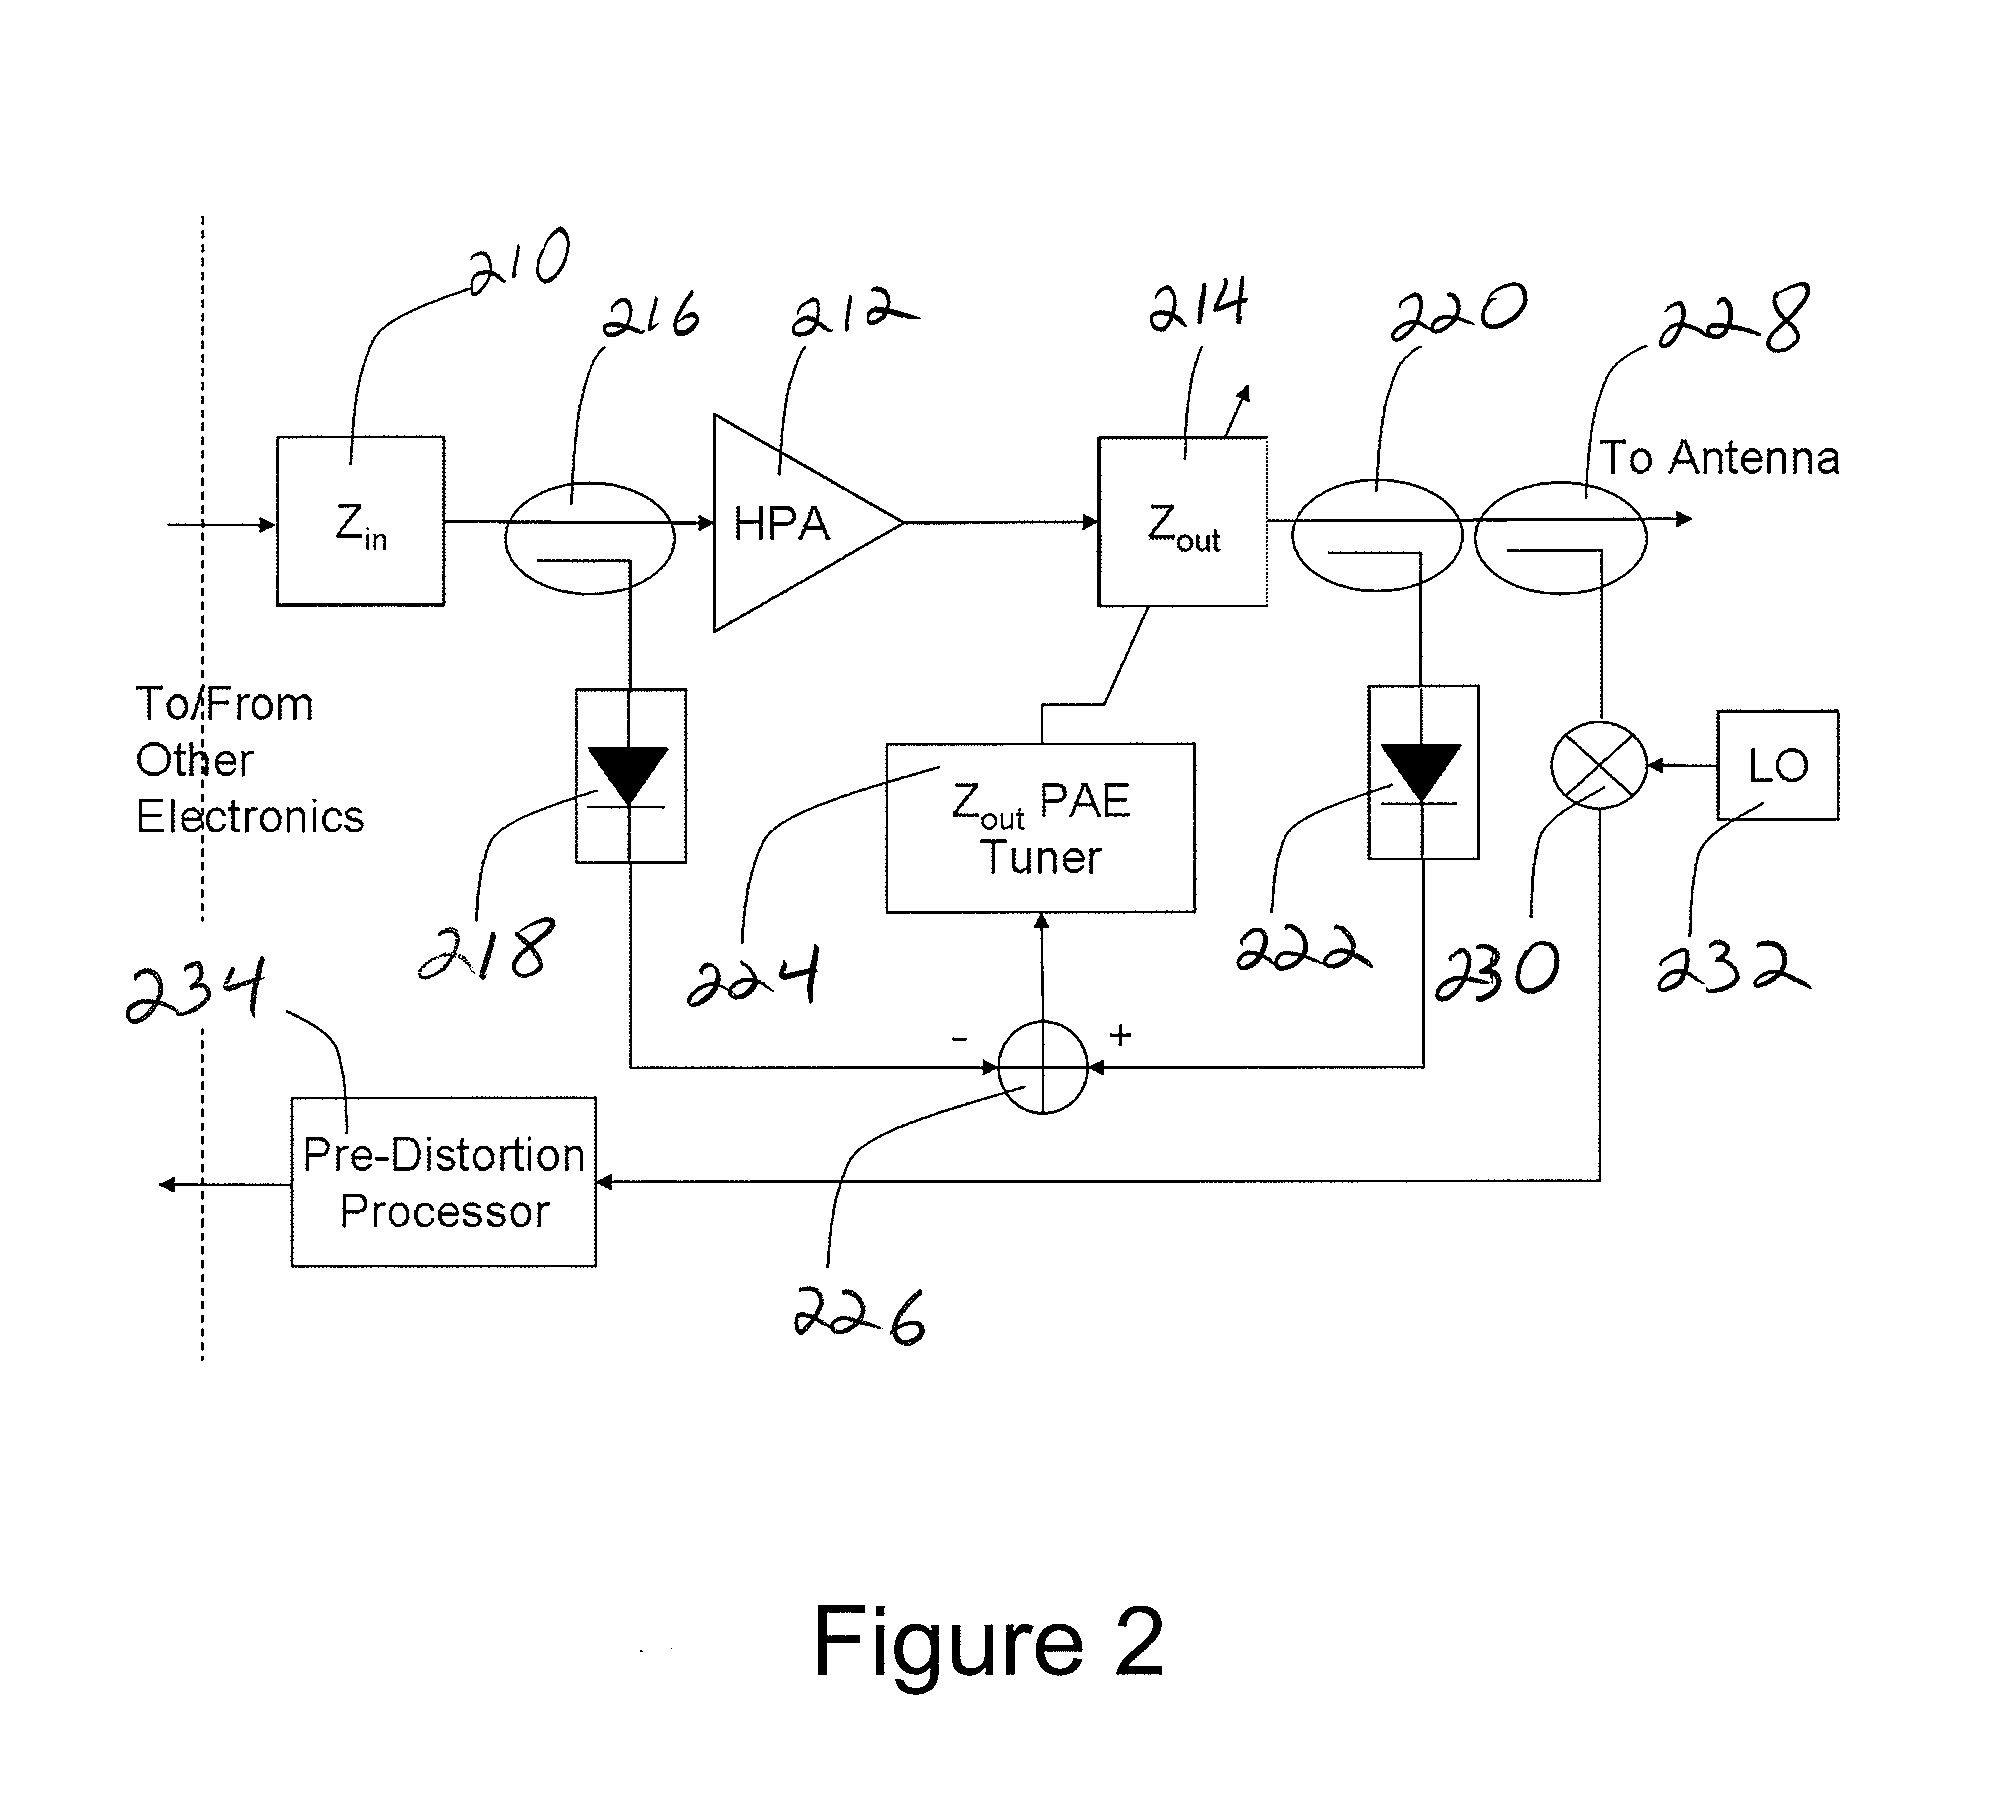 Apparatus and method for power added efficiency optimization of high amplification applications